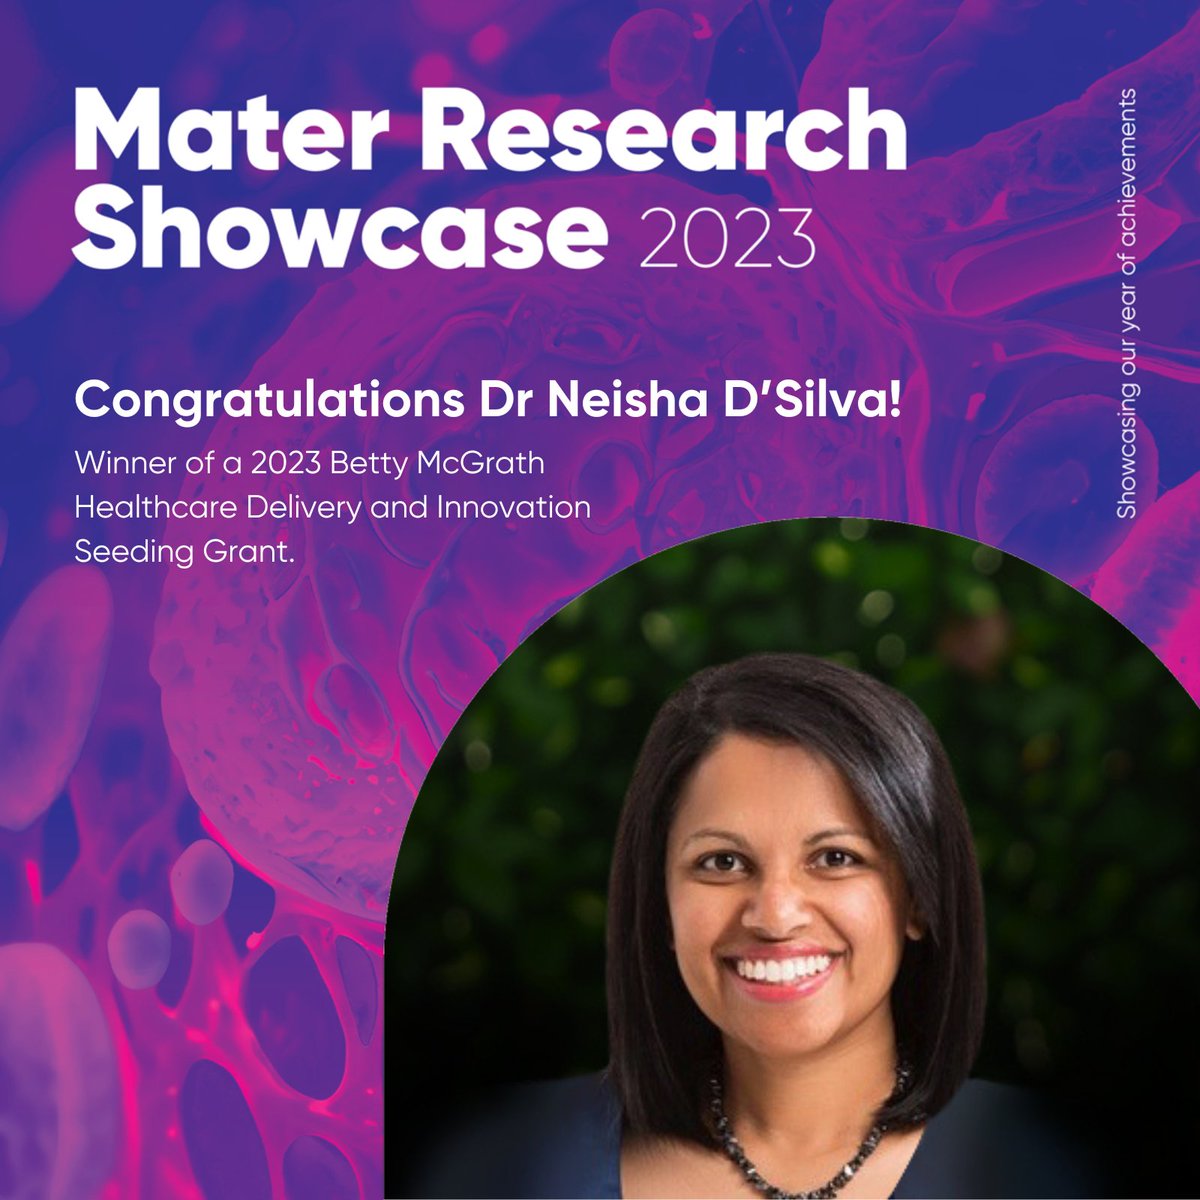 Congratulations to Dr Neisha D’Silva, winner of a 2023 Betty McGrath Healthcare Delivery and Innovation Seeding Grant. Dr D’Silva is a Senior Staff Specialist, Endocrinology at the Queensland Diabetes and Endocrine Centre (QDEC).